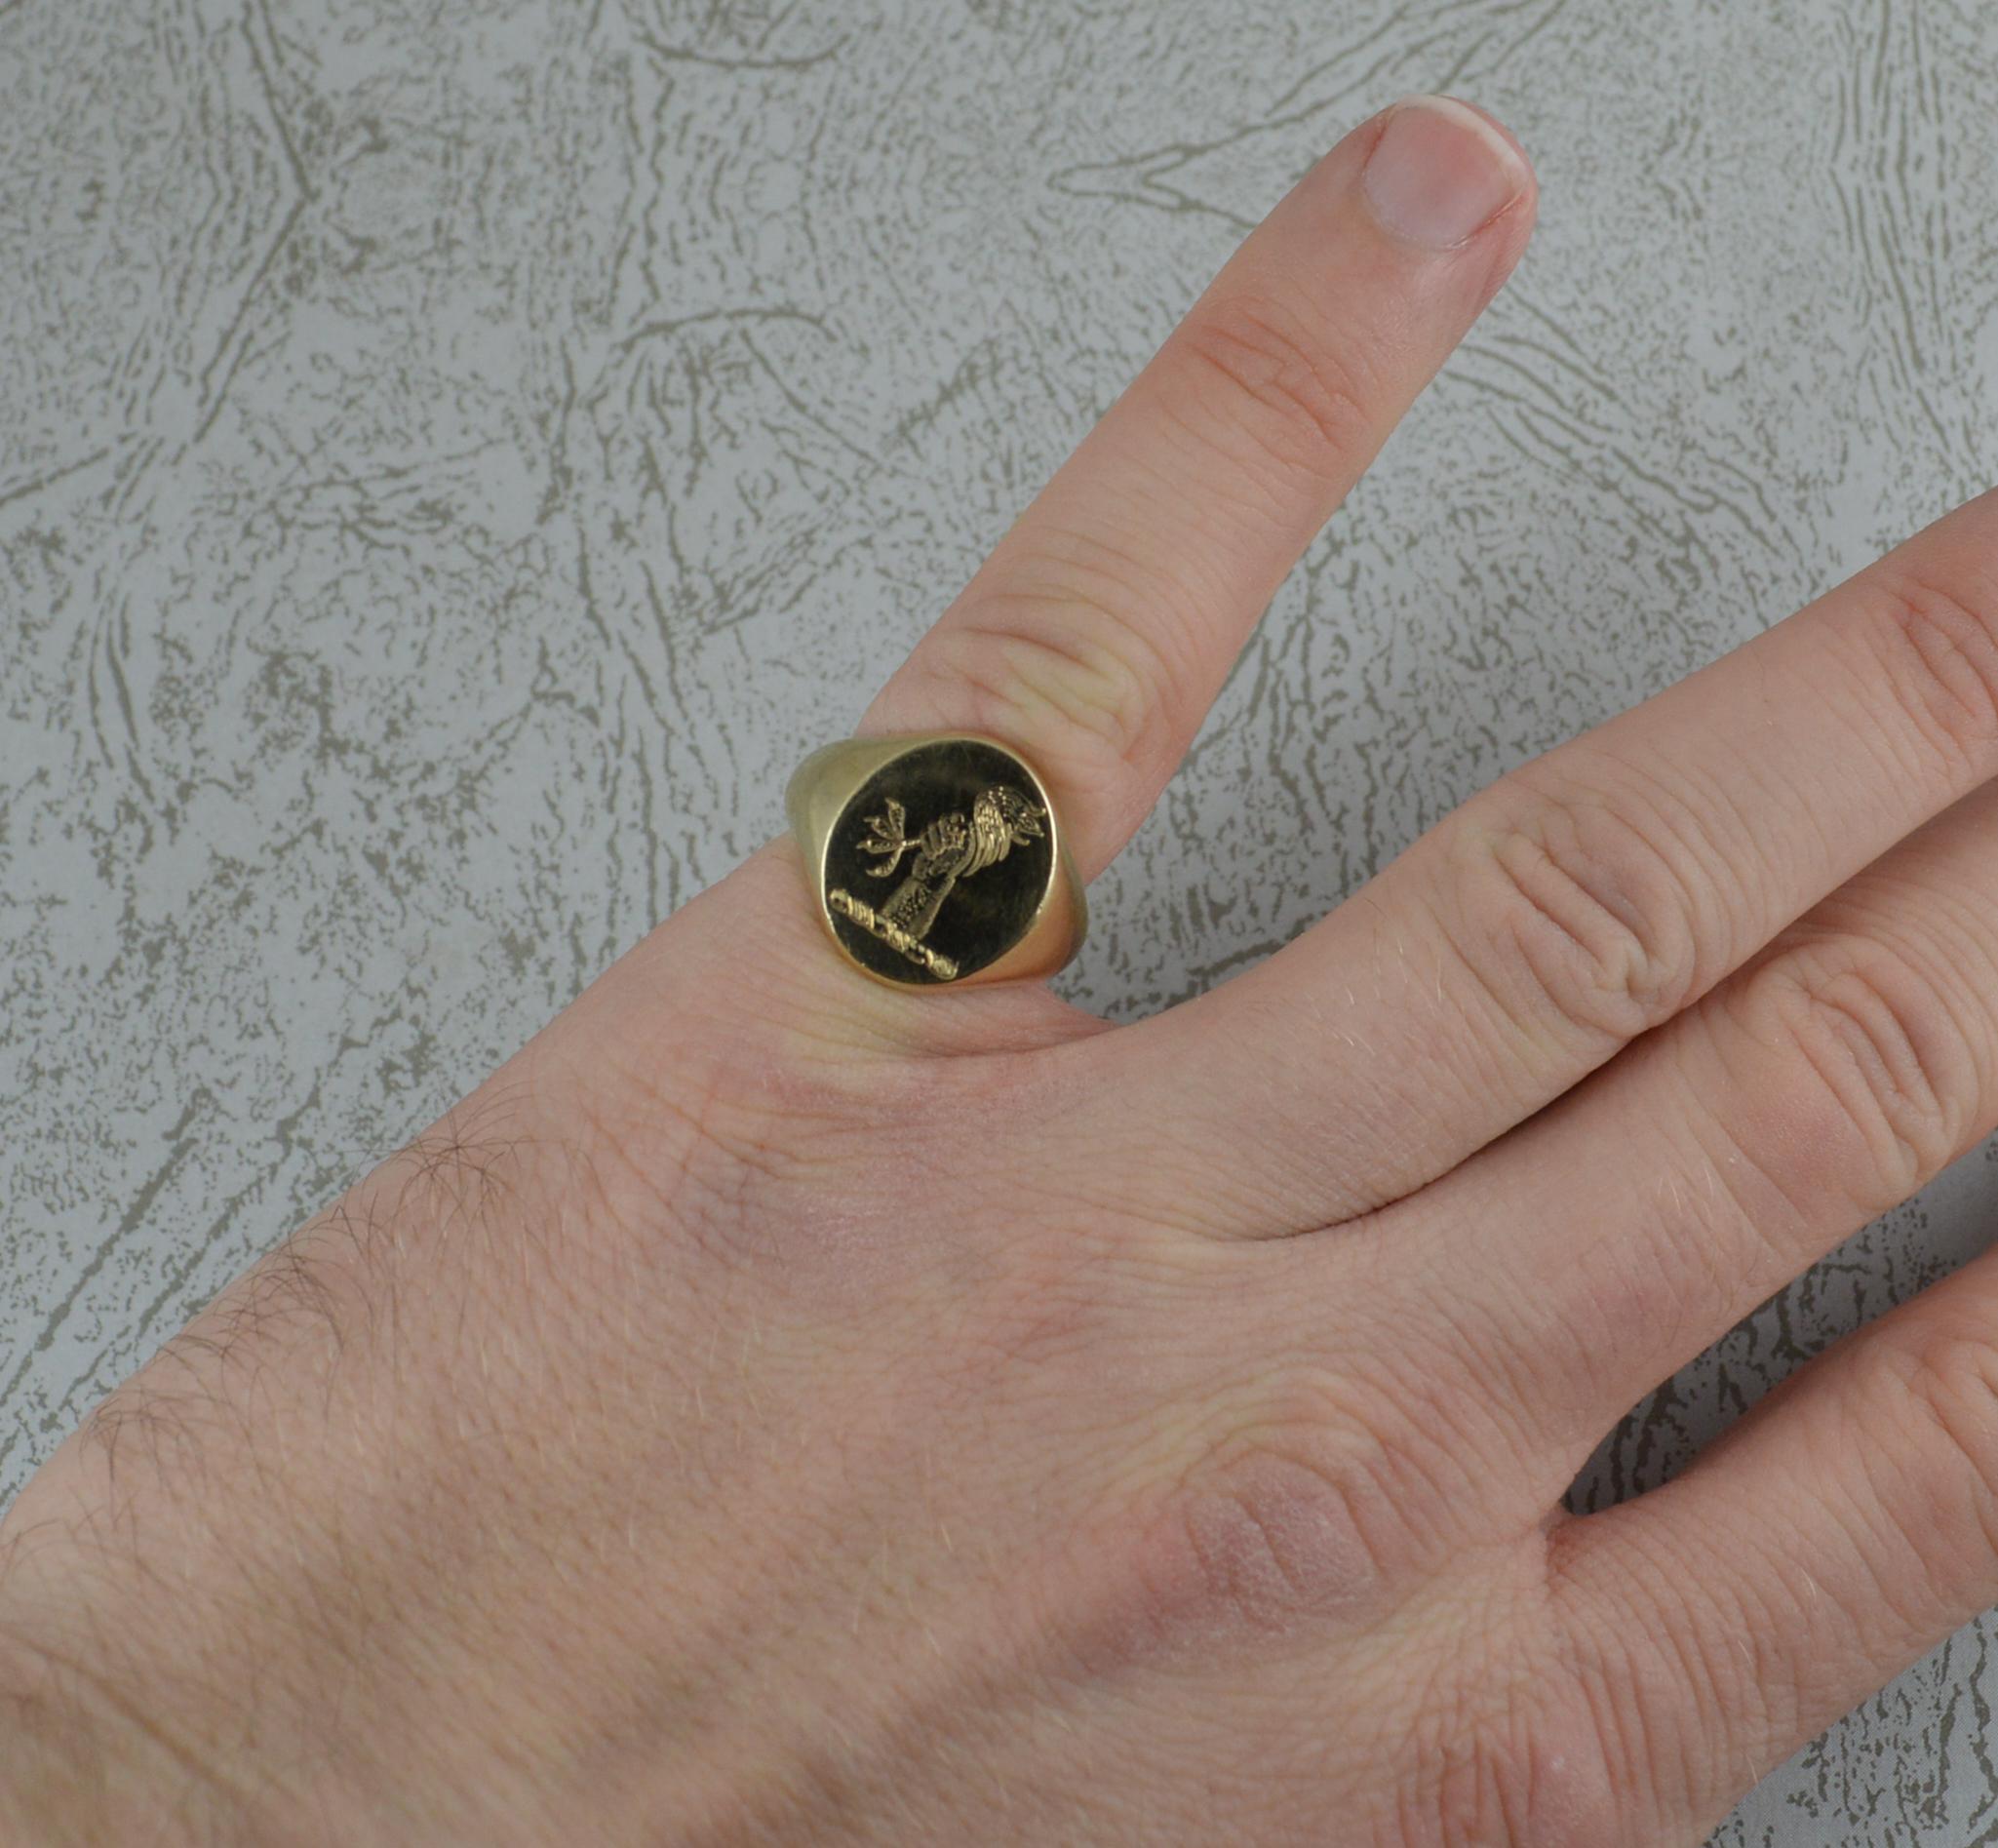 A superb chunky and heavy 9 carat gold signet ring.
9 carat yellow gold example with oval front.
13mm x 15mm head. Engraved with an arm reaching out of the ground holding a chicken leg.

CONDITION ; Very good. Clean solid shank. Light wear to band.